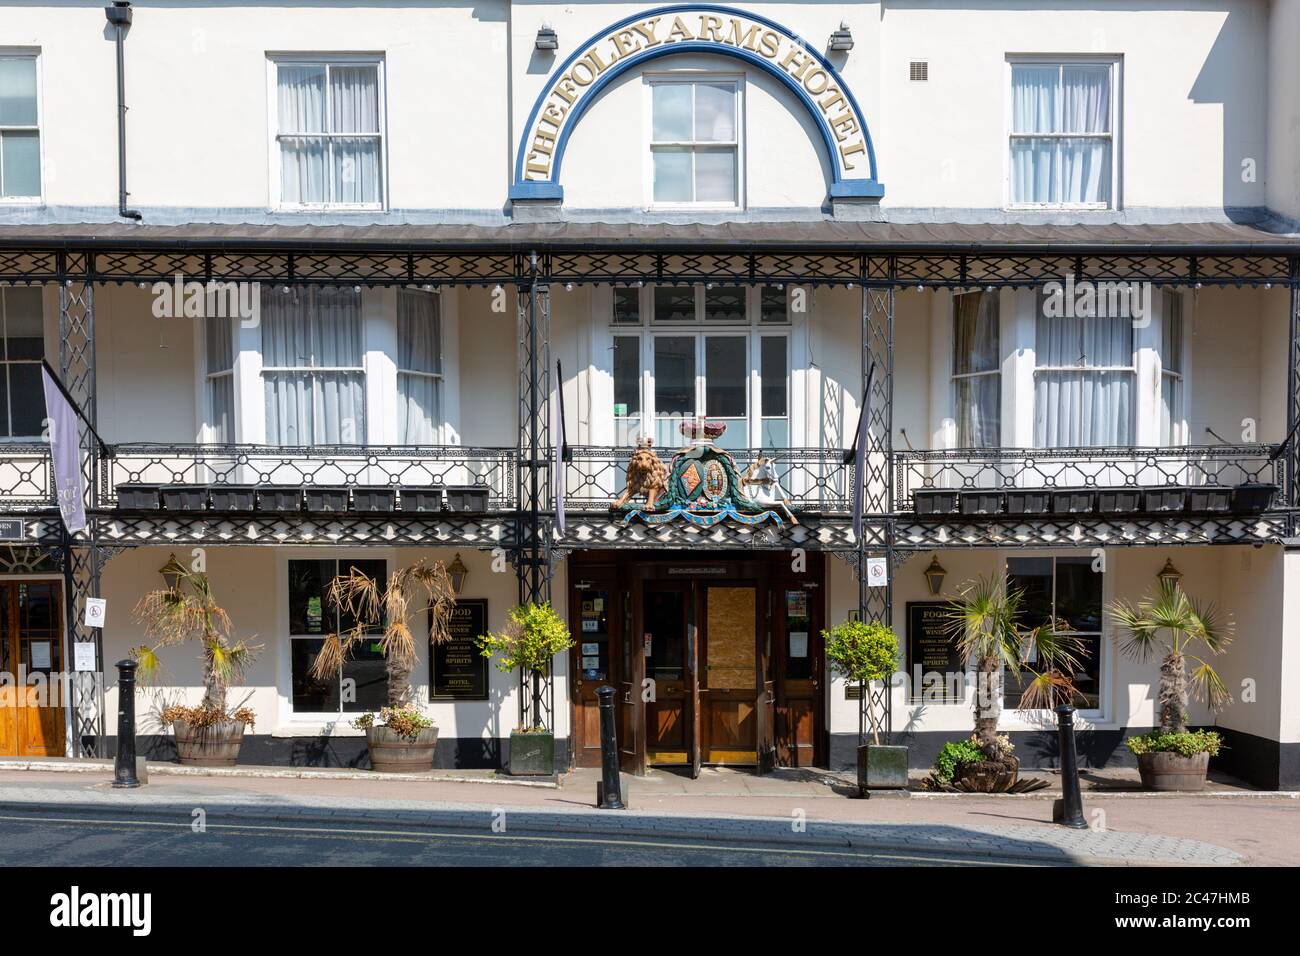 The Foley Arms, Wetherspoons pub, Great Malvern, Worcestershire UK Stock Photo